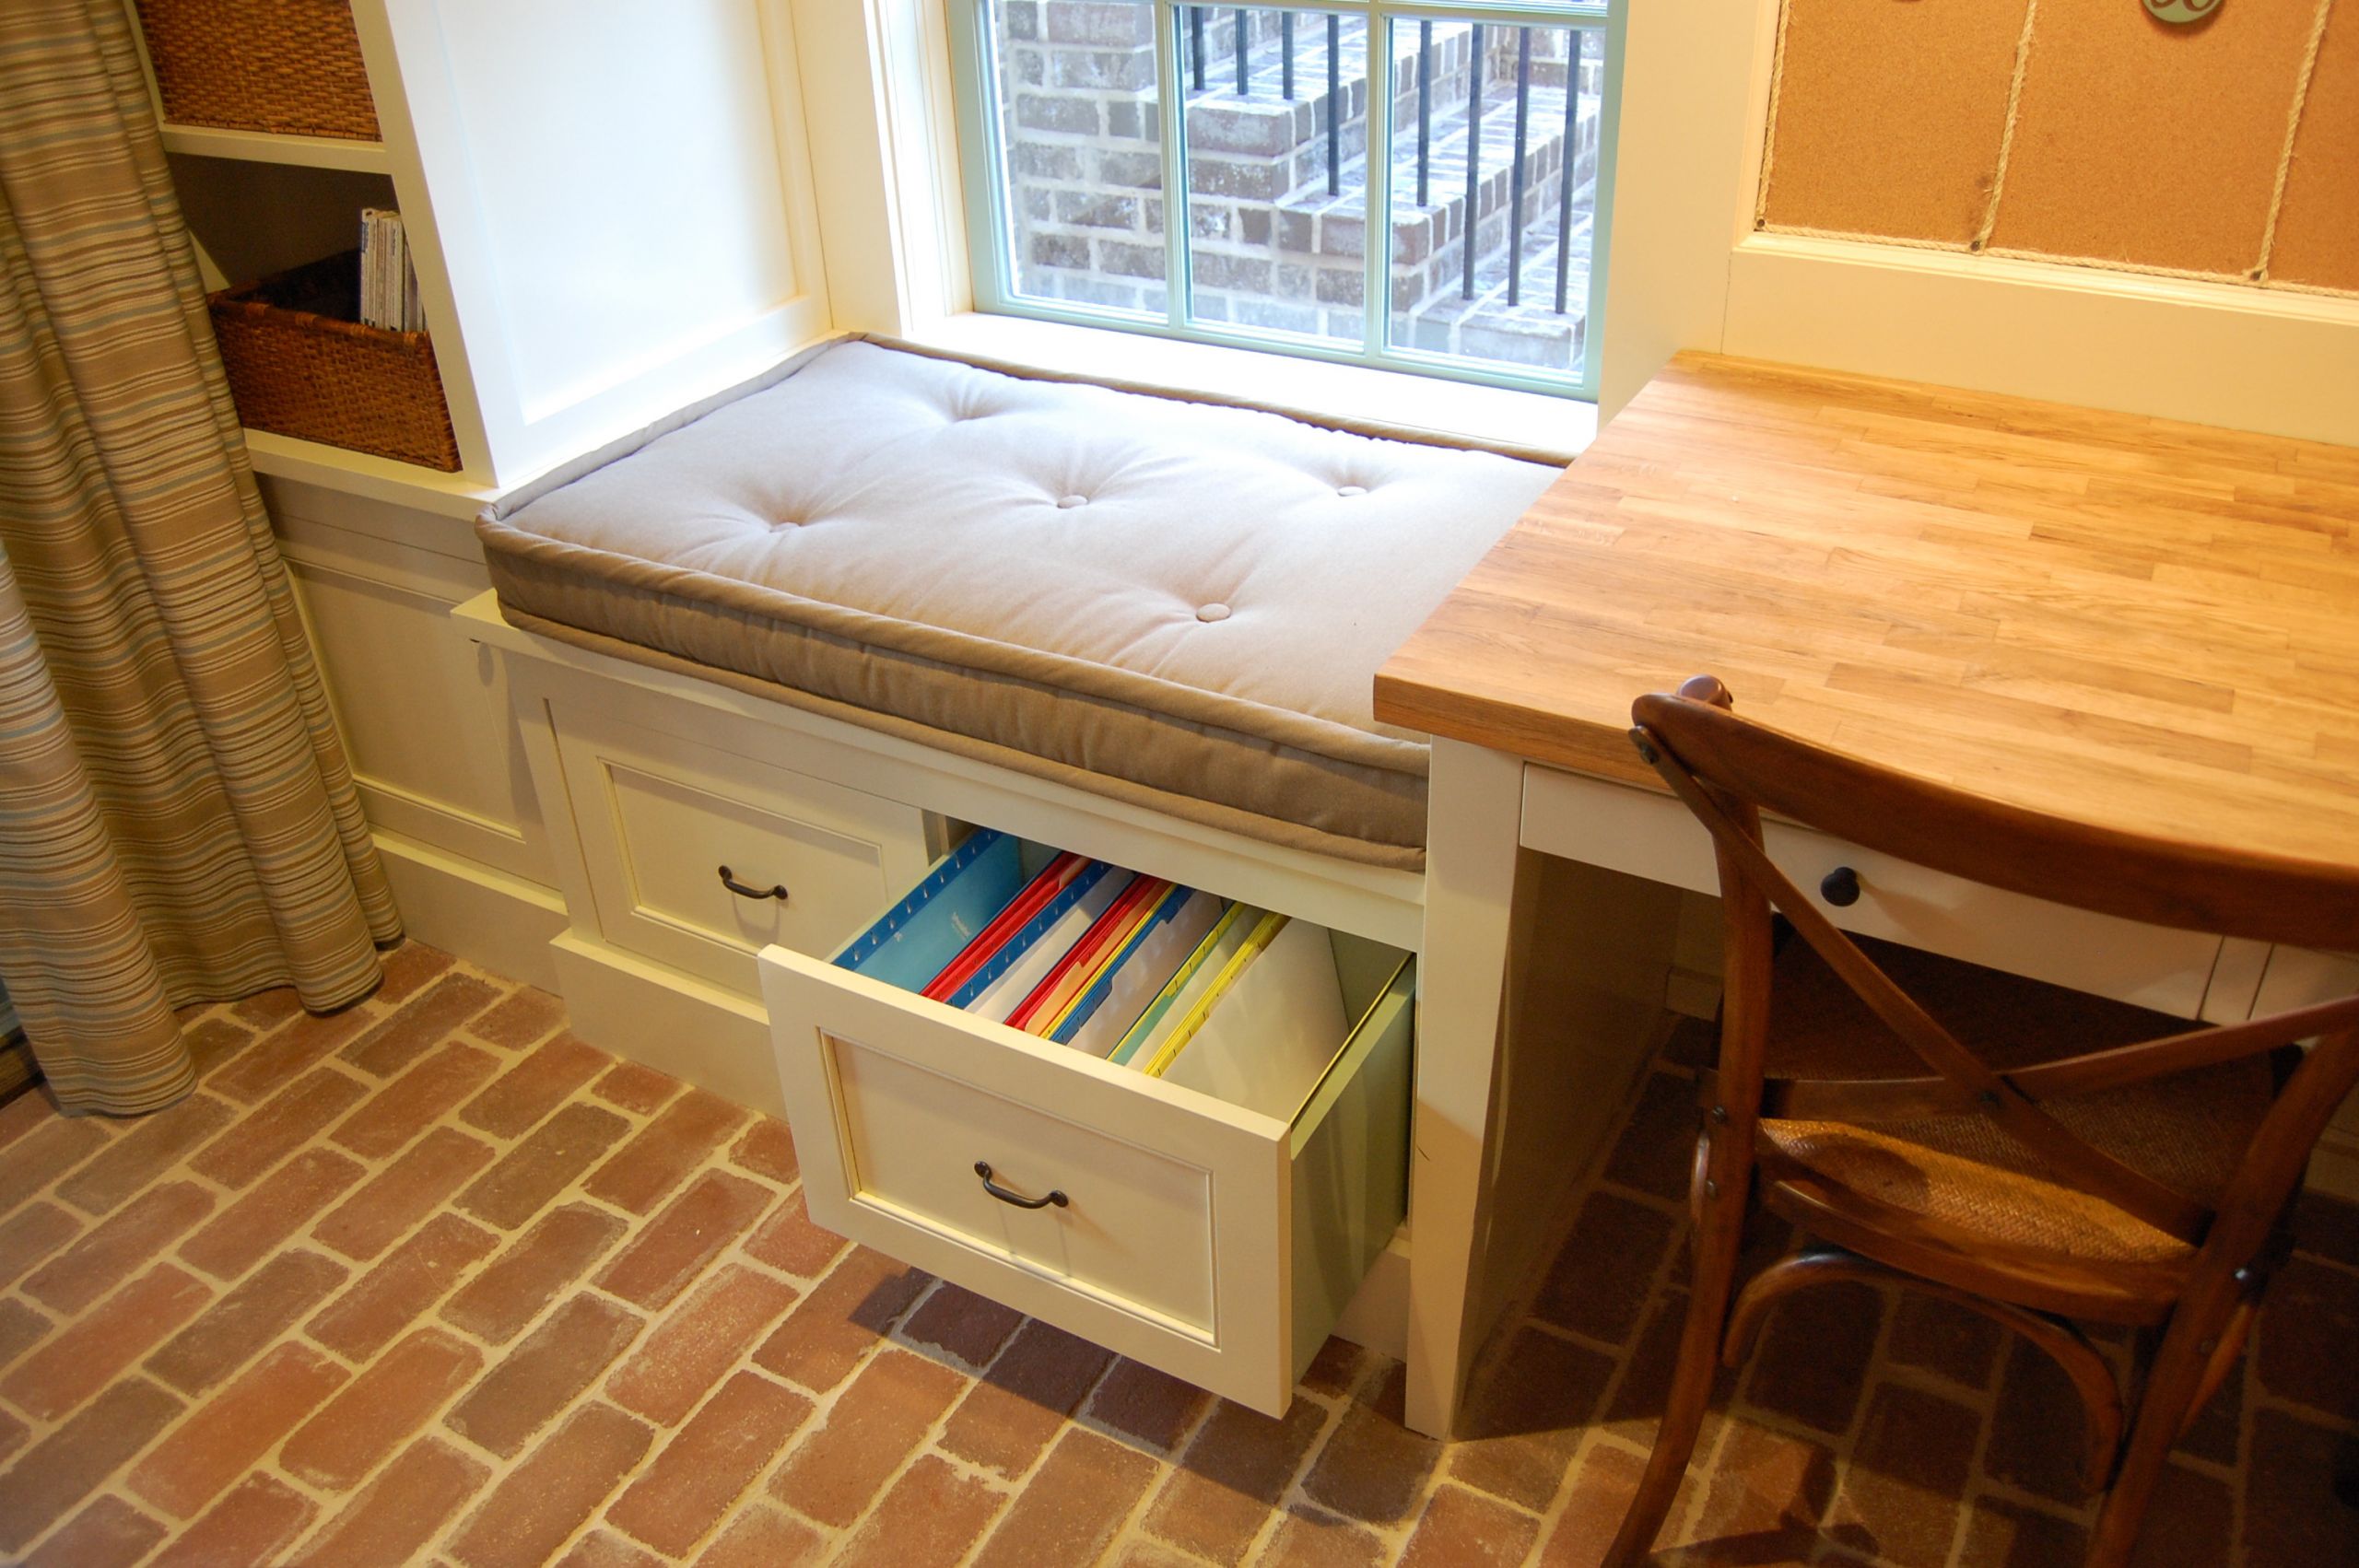 Storage Bench Filing Cabinet
 Cabinetry